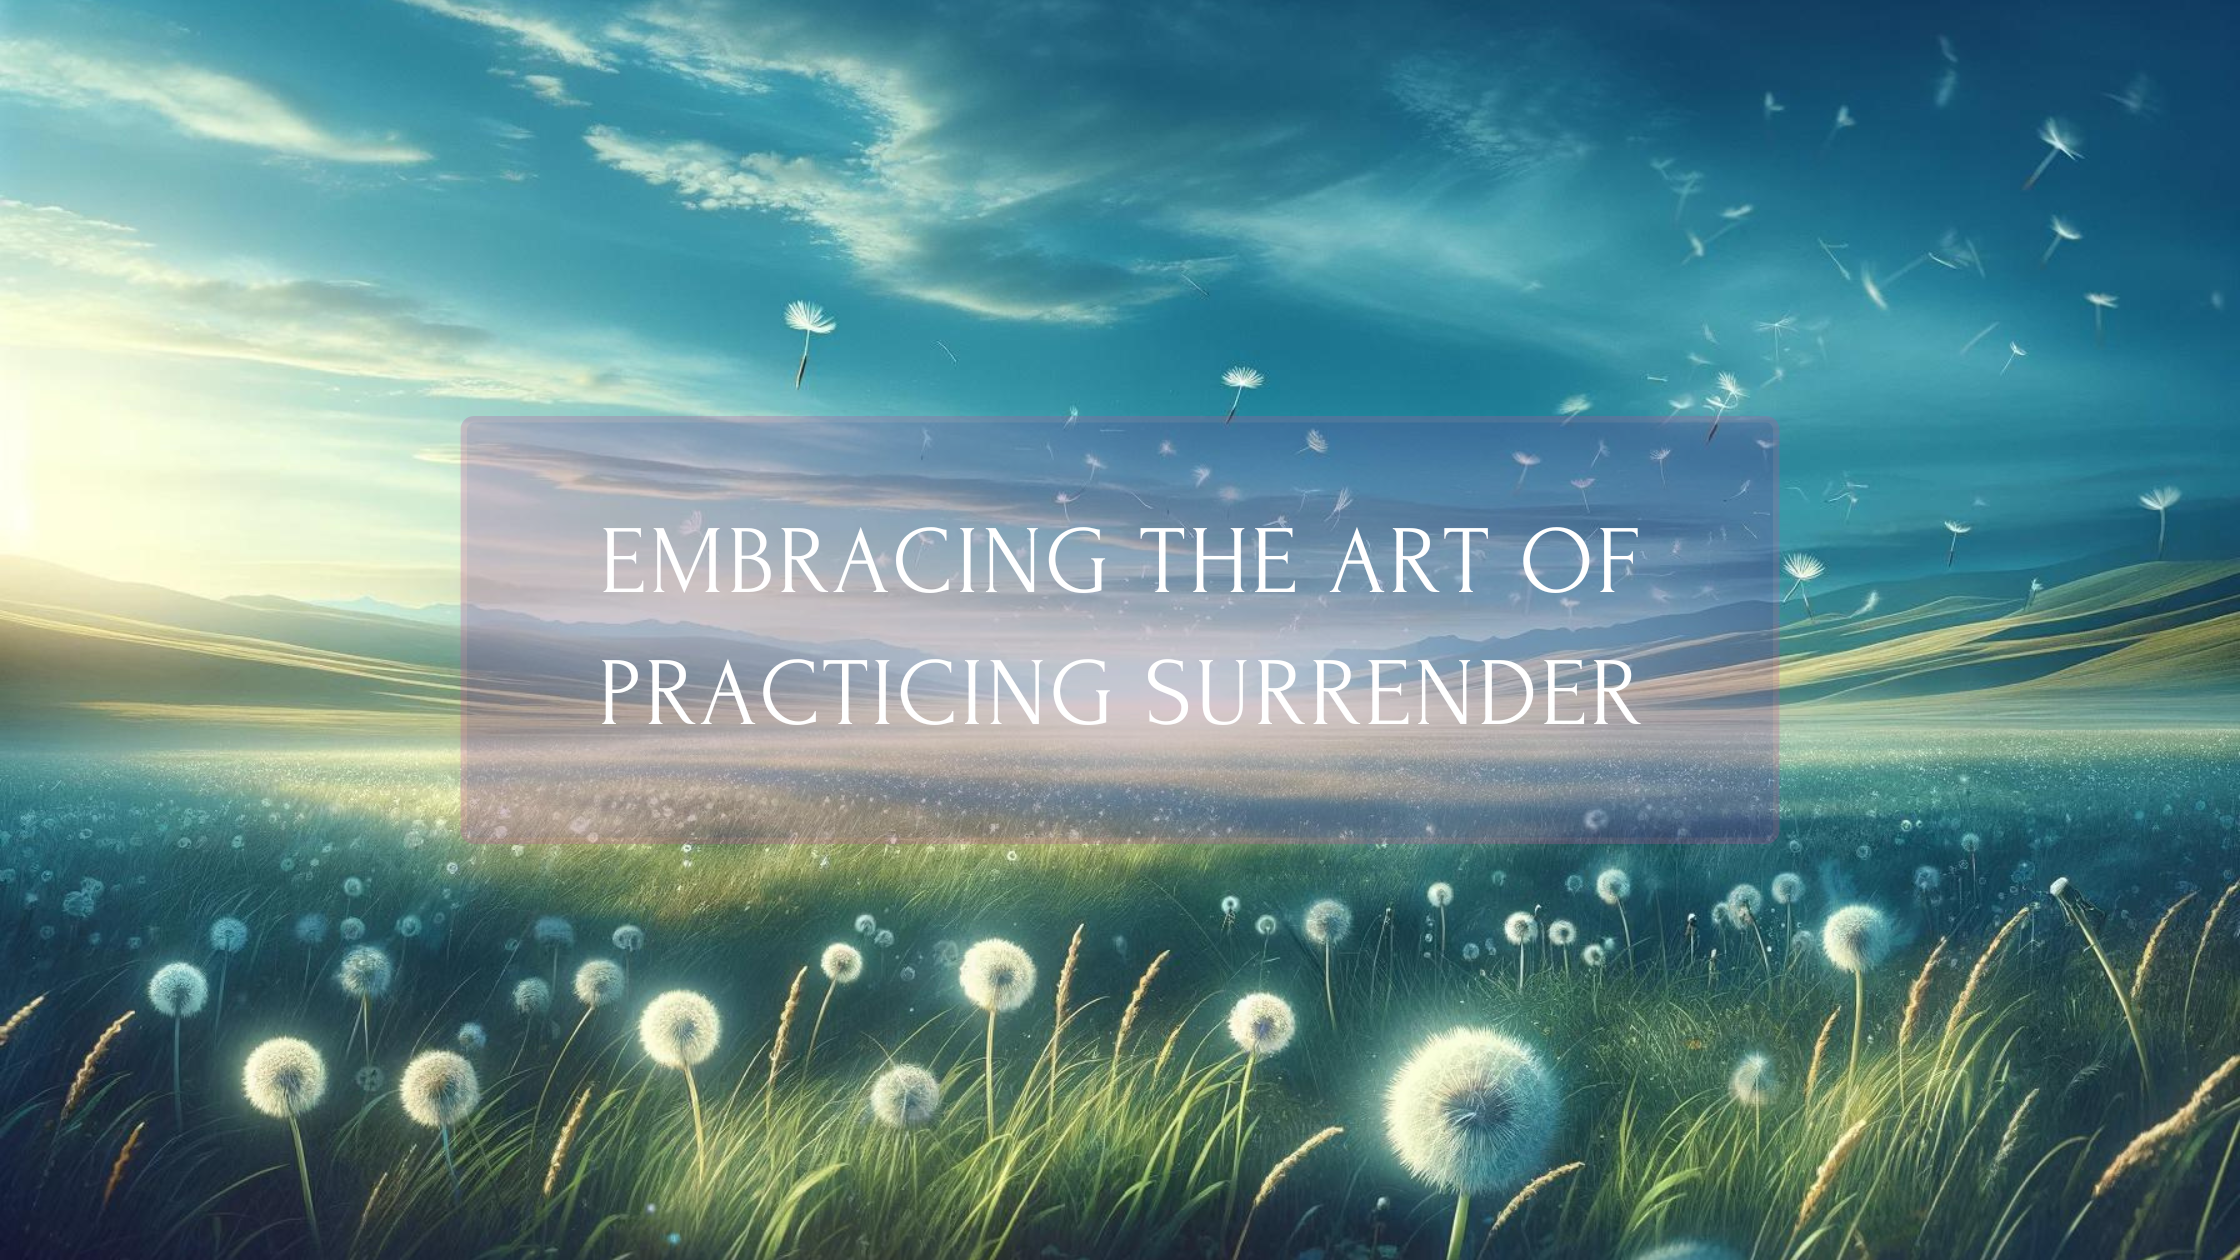 Serene landscape with dandelion seeds floating in the wind, embodying the practice of surrender.